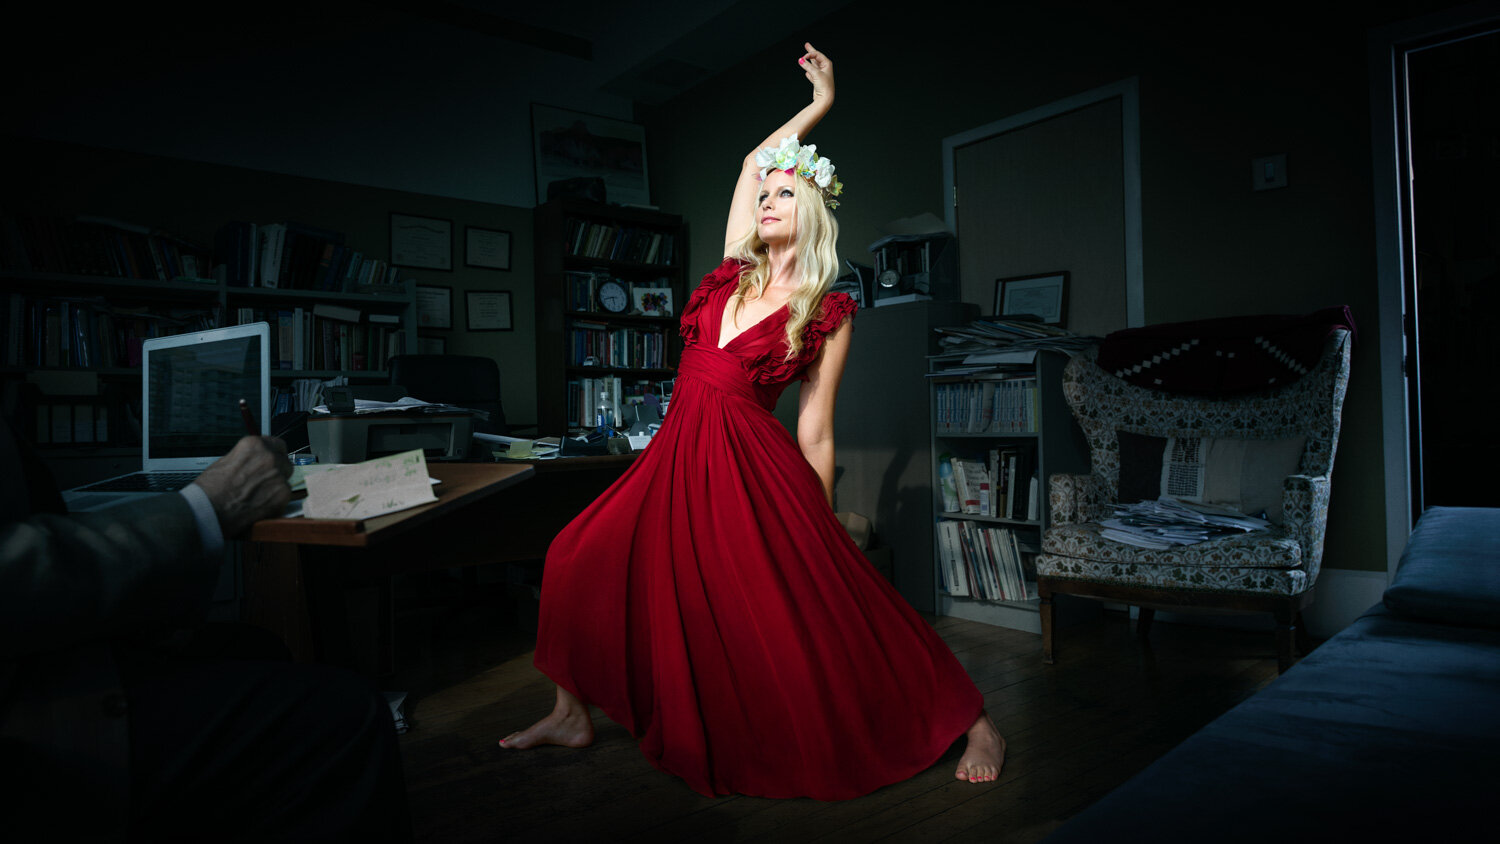 creative portrait of yogi Leila Johnson doing yoga in long red dress in therapy session by creative portrait photographer Hanna Agar